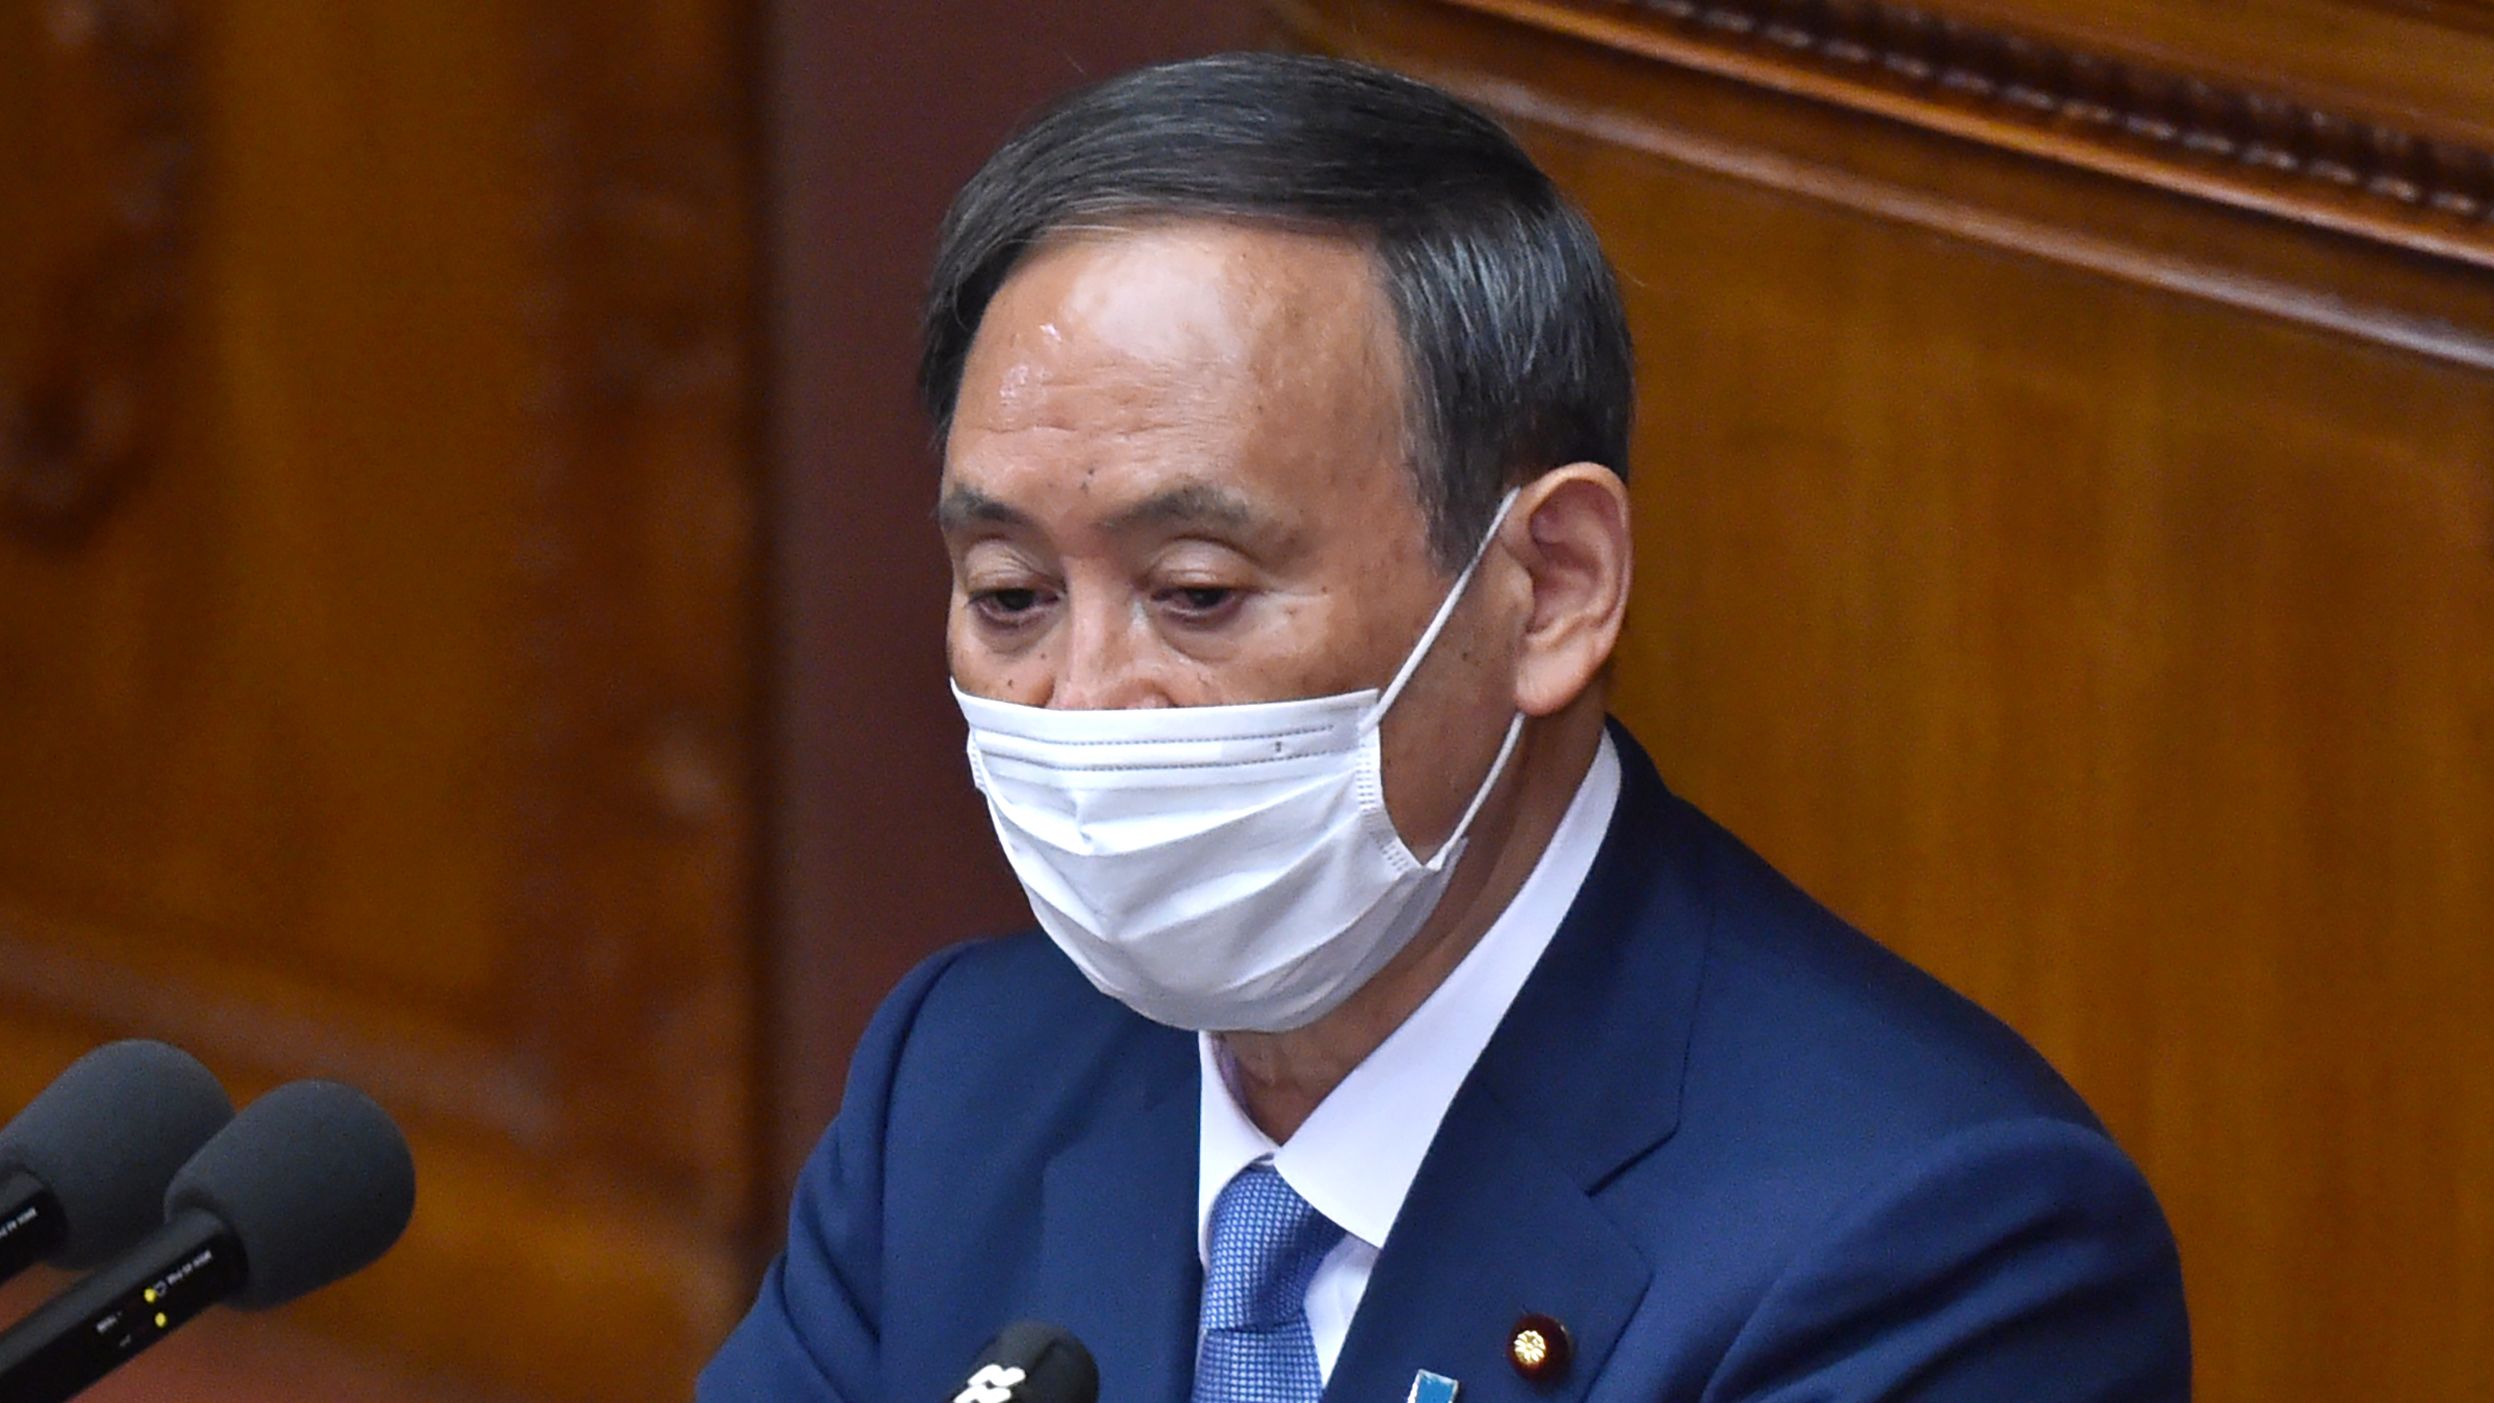 Japan's Prime Minister, Yoshihide Suga, unveils his climate policy in Parliament on Monday.